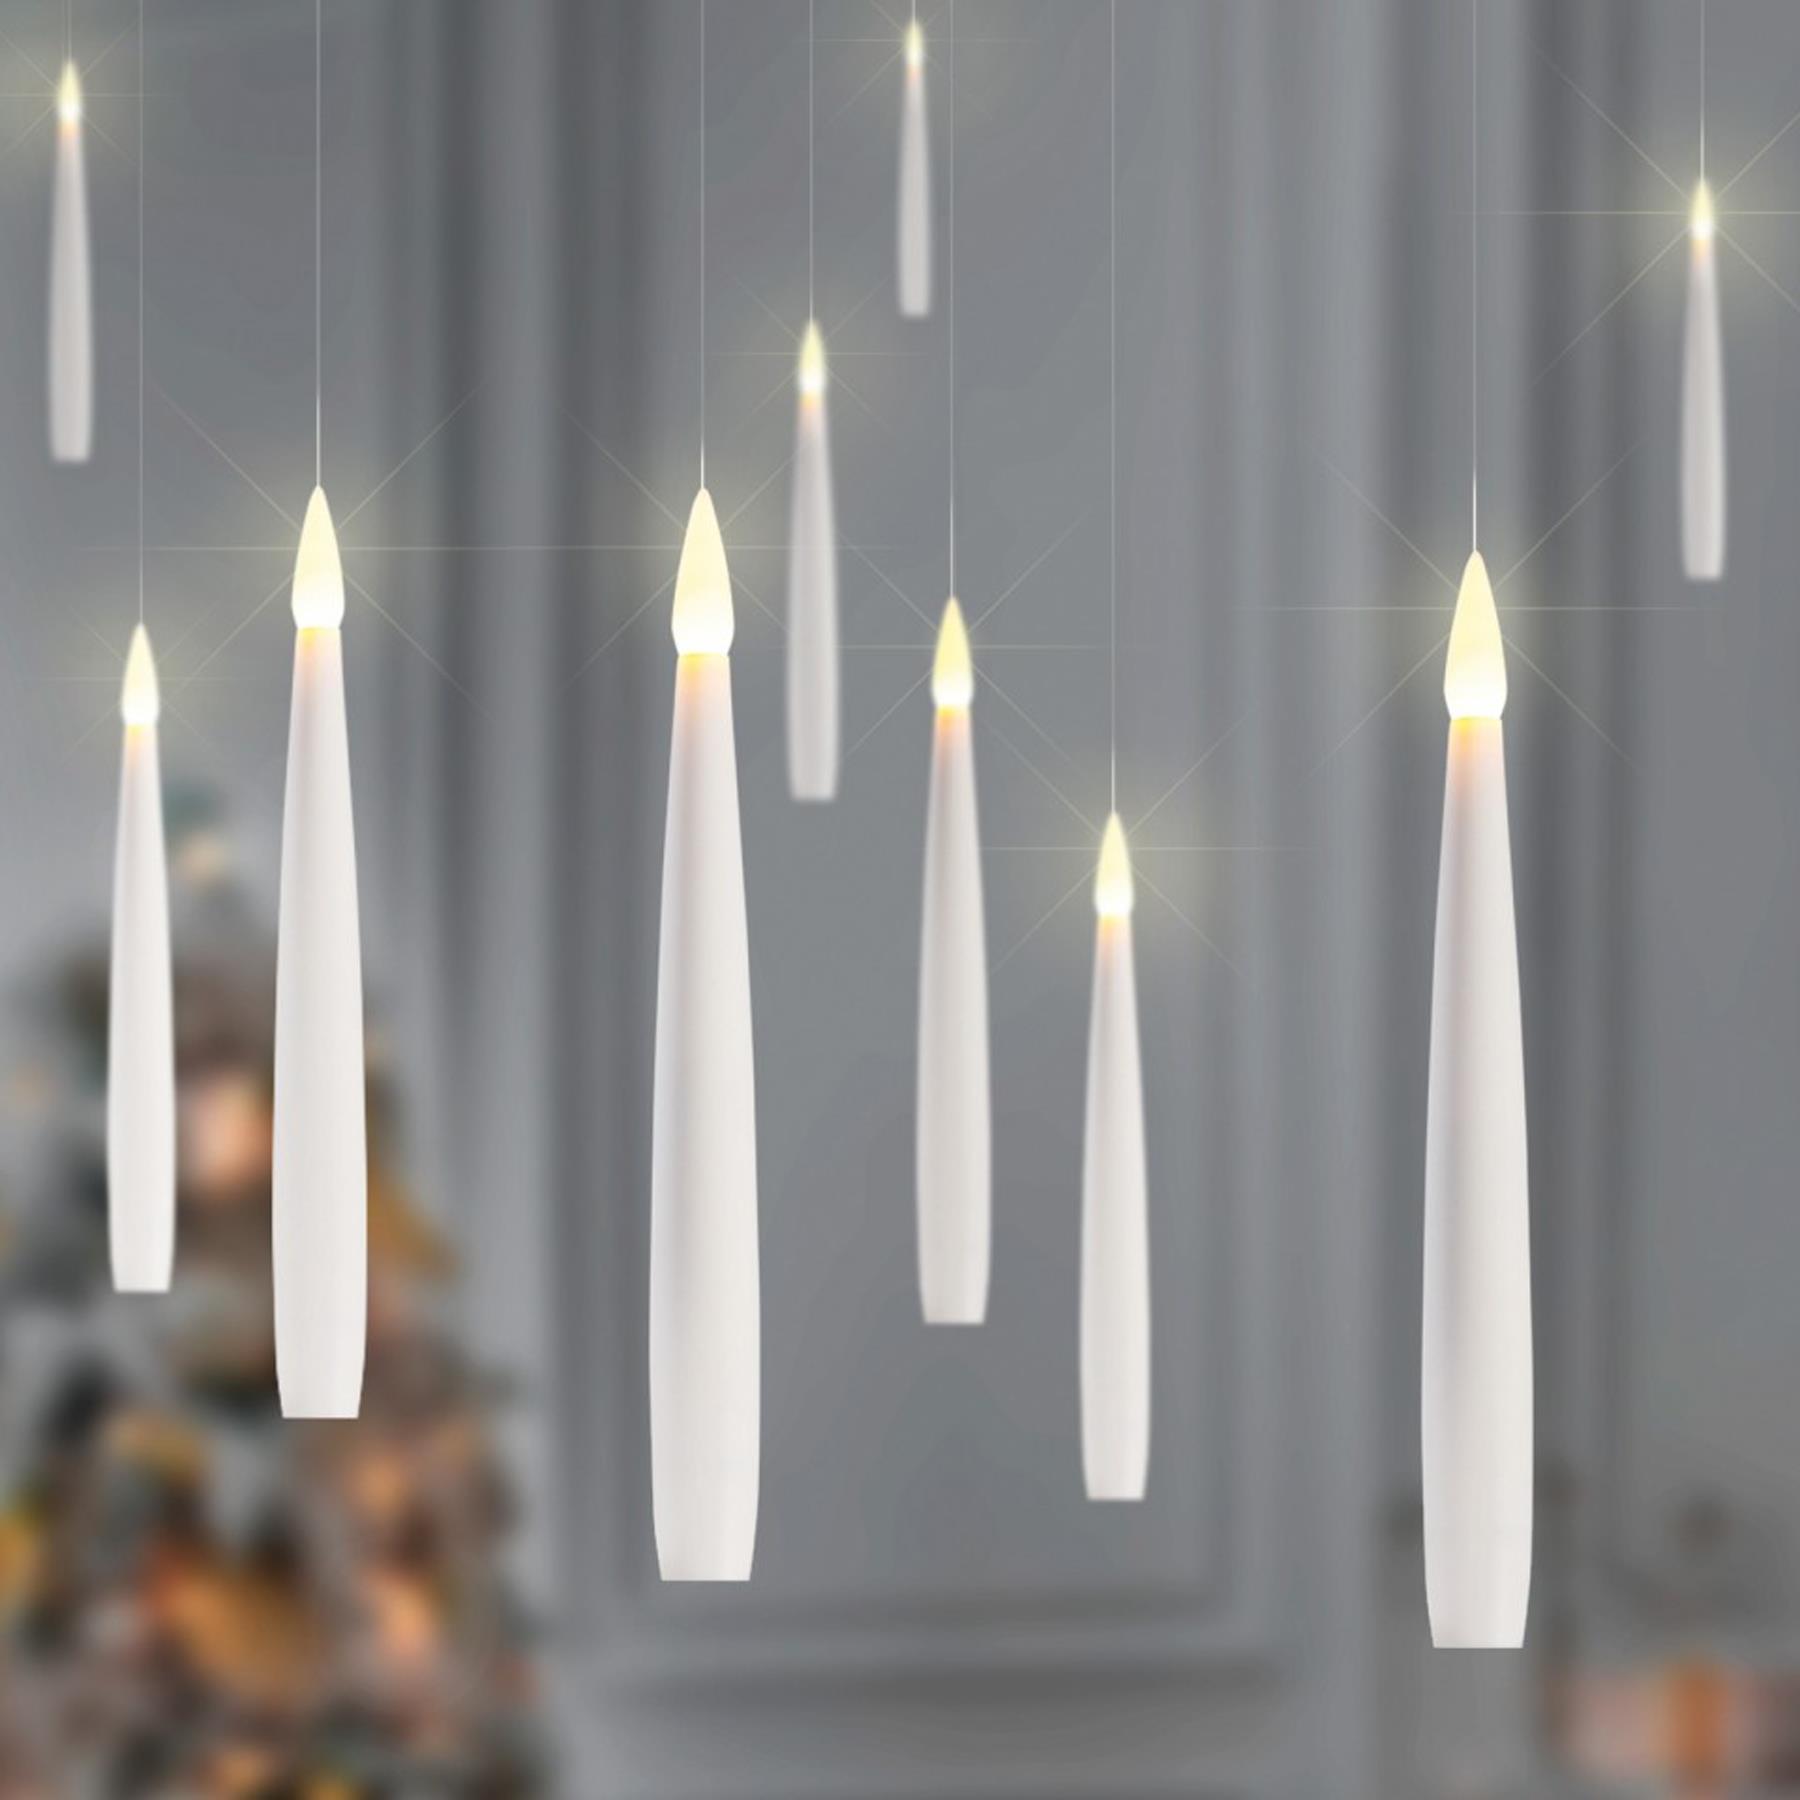 Set of 10 Floating Candles Battery Operated Warm White Lights Christmas Decoration